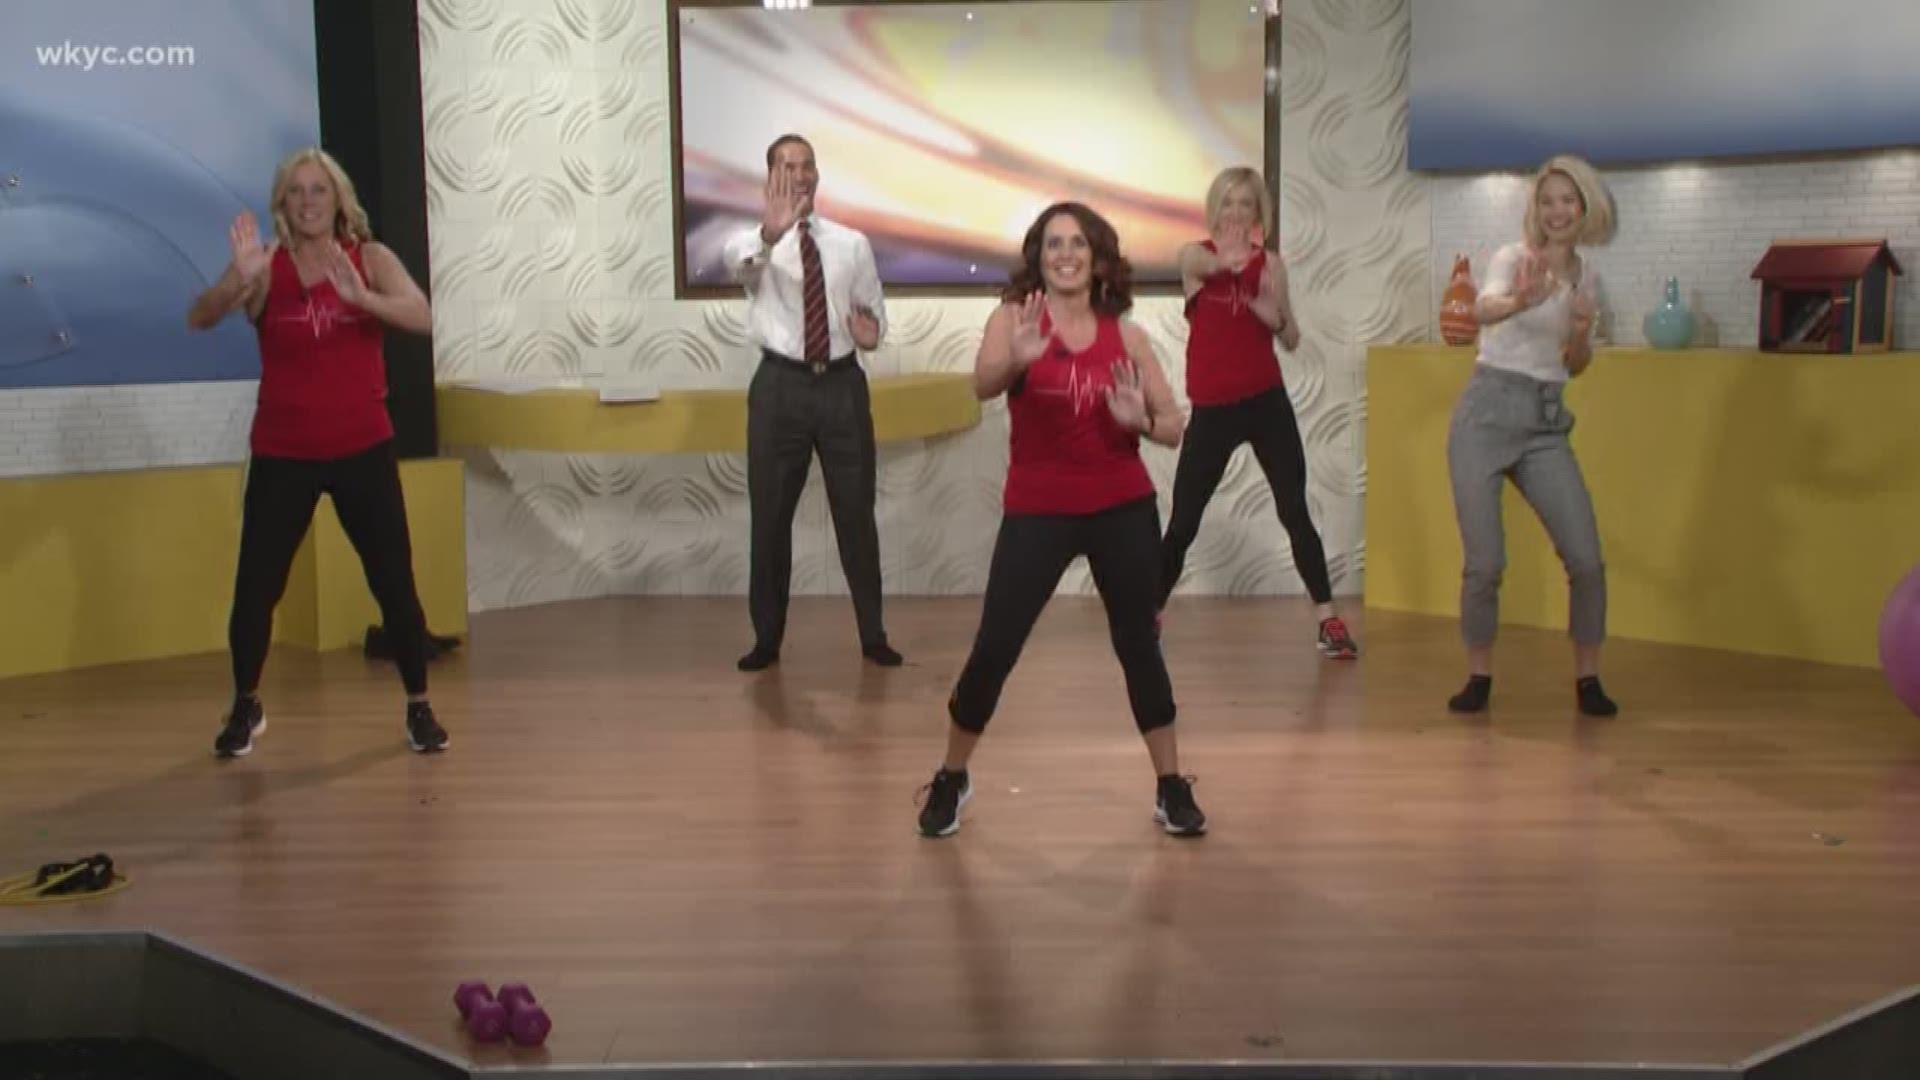 Getting fit for 50 years; Jazzercise celebrates anniversary with